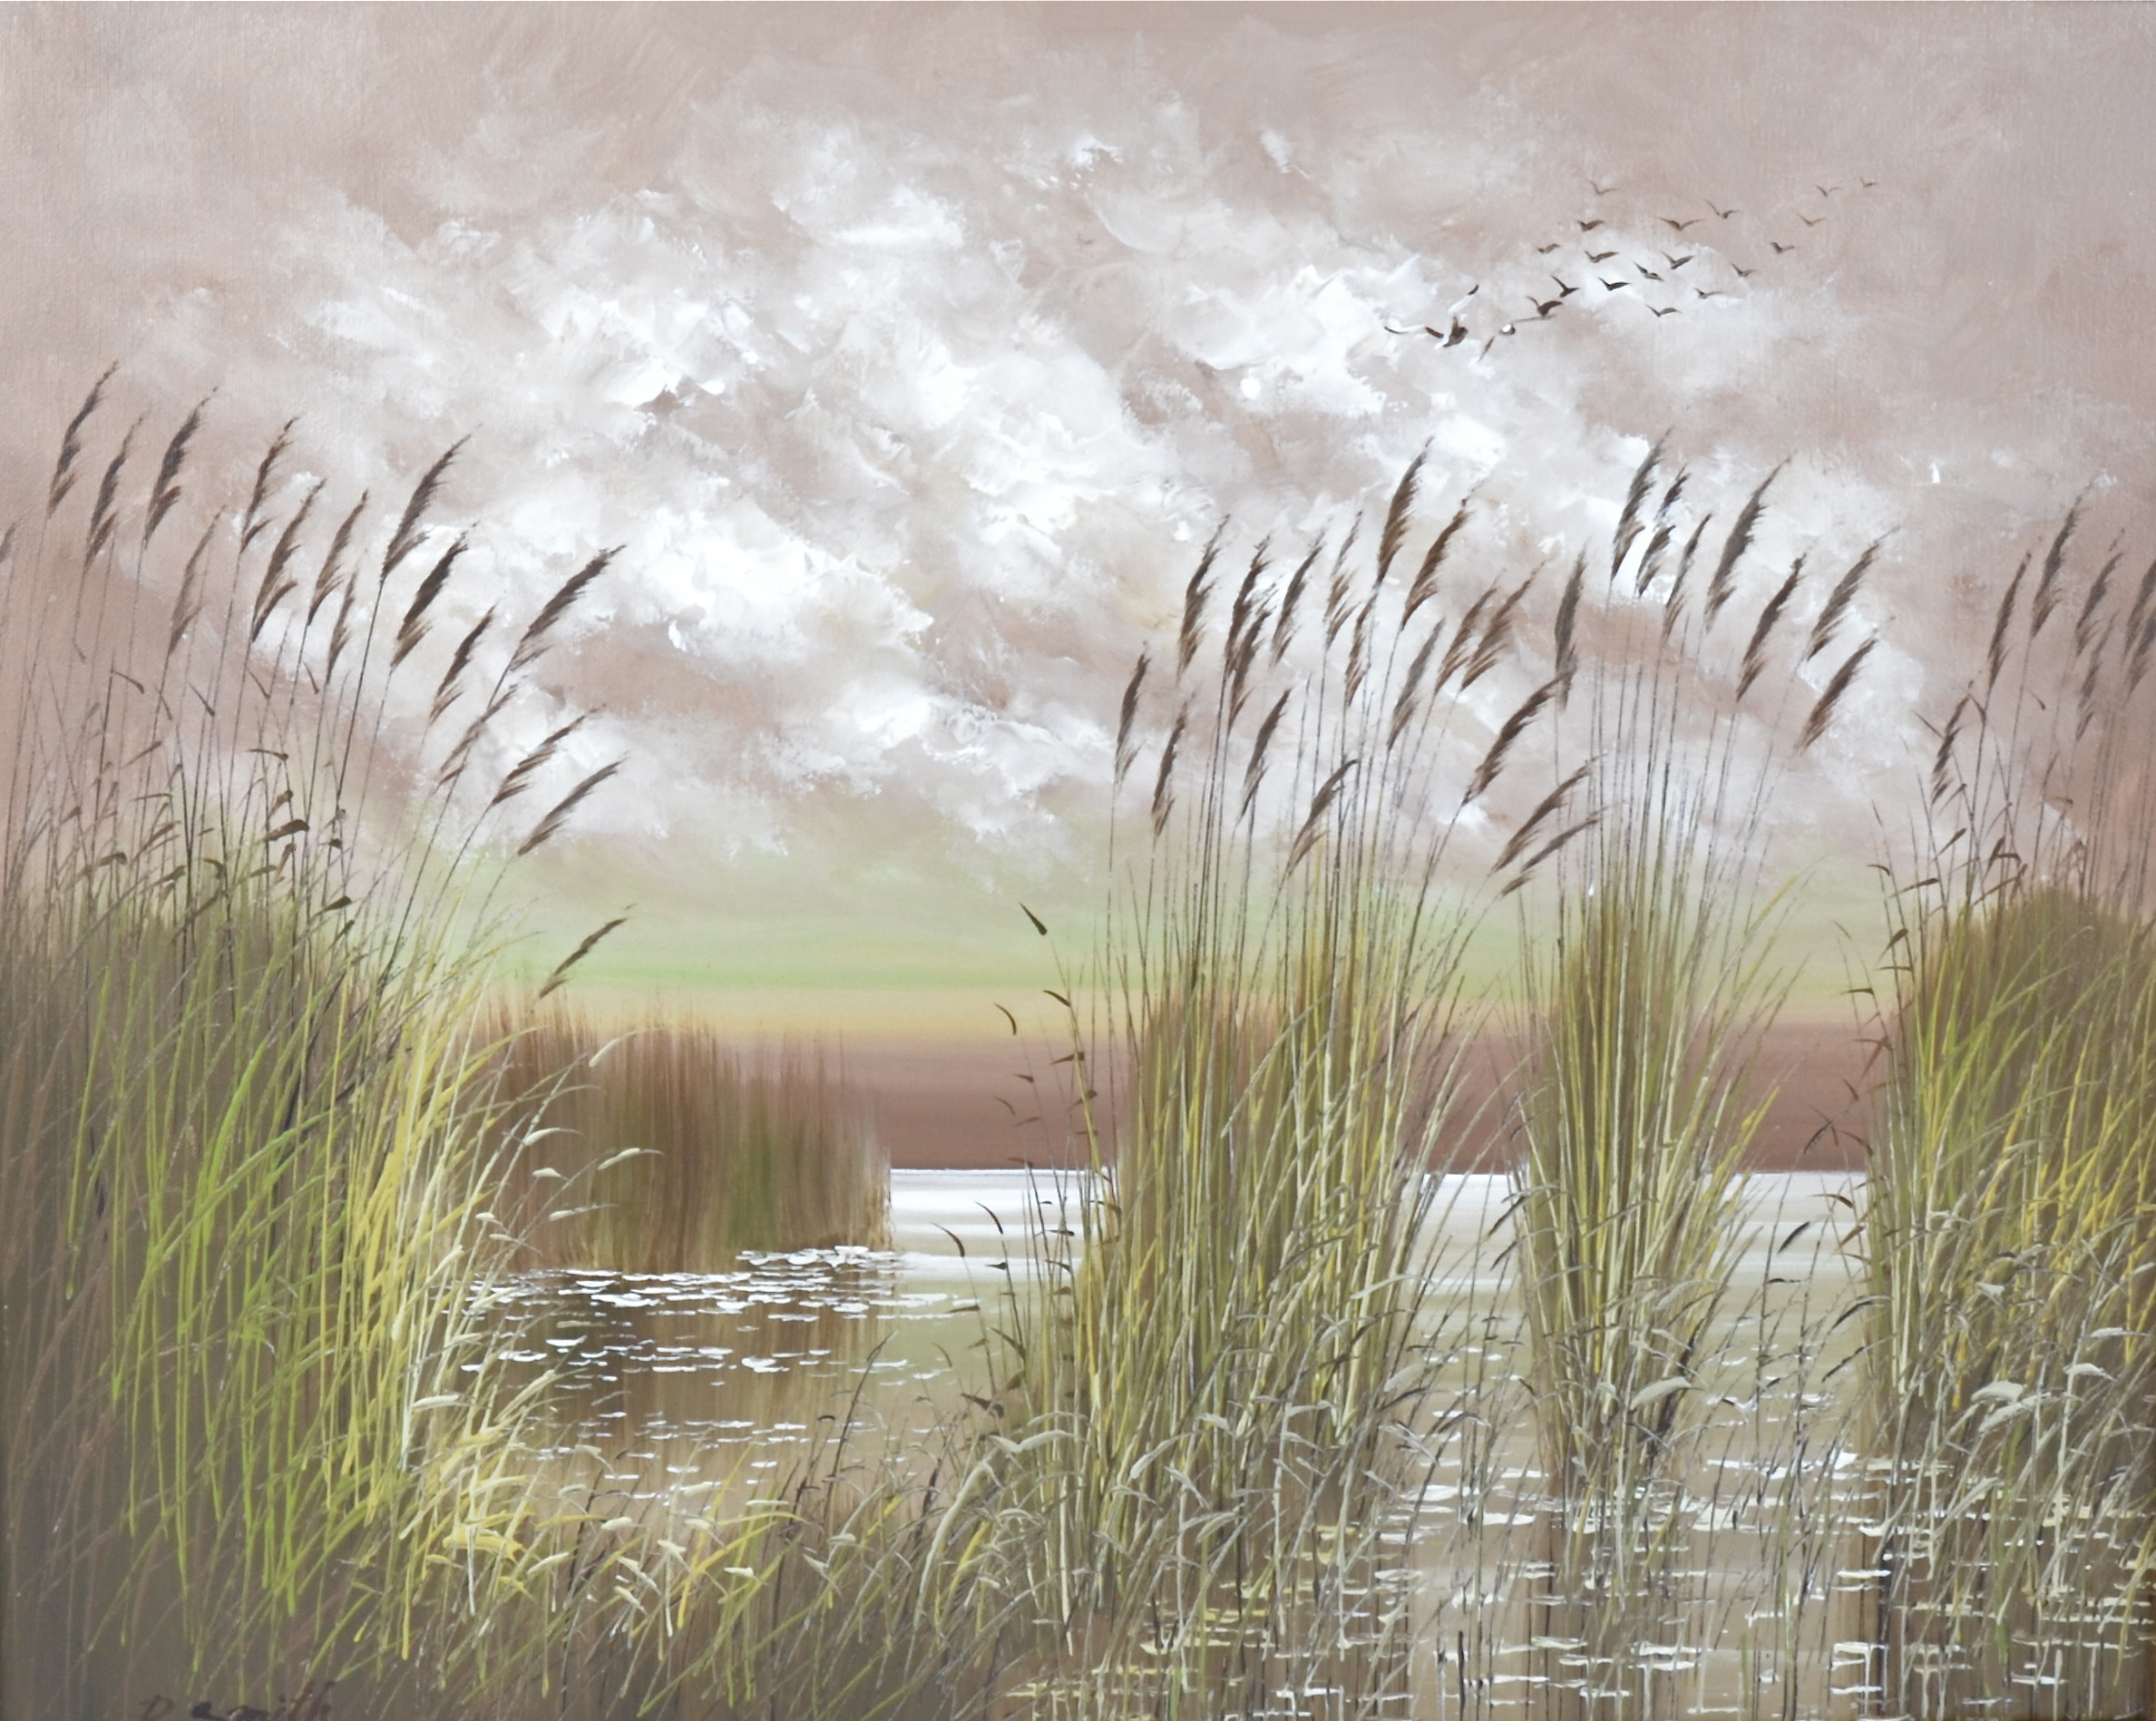 20th Century oil on canvas, reed beds, signed (lower left) 'P. Smith', framed, internal dimensions